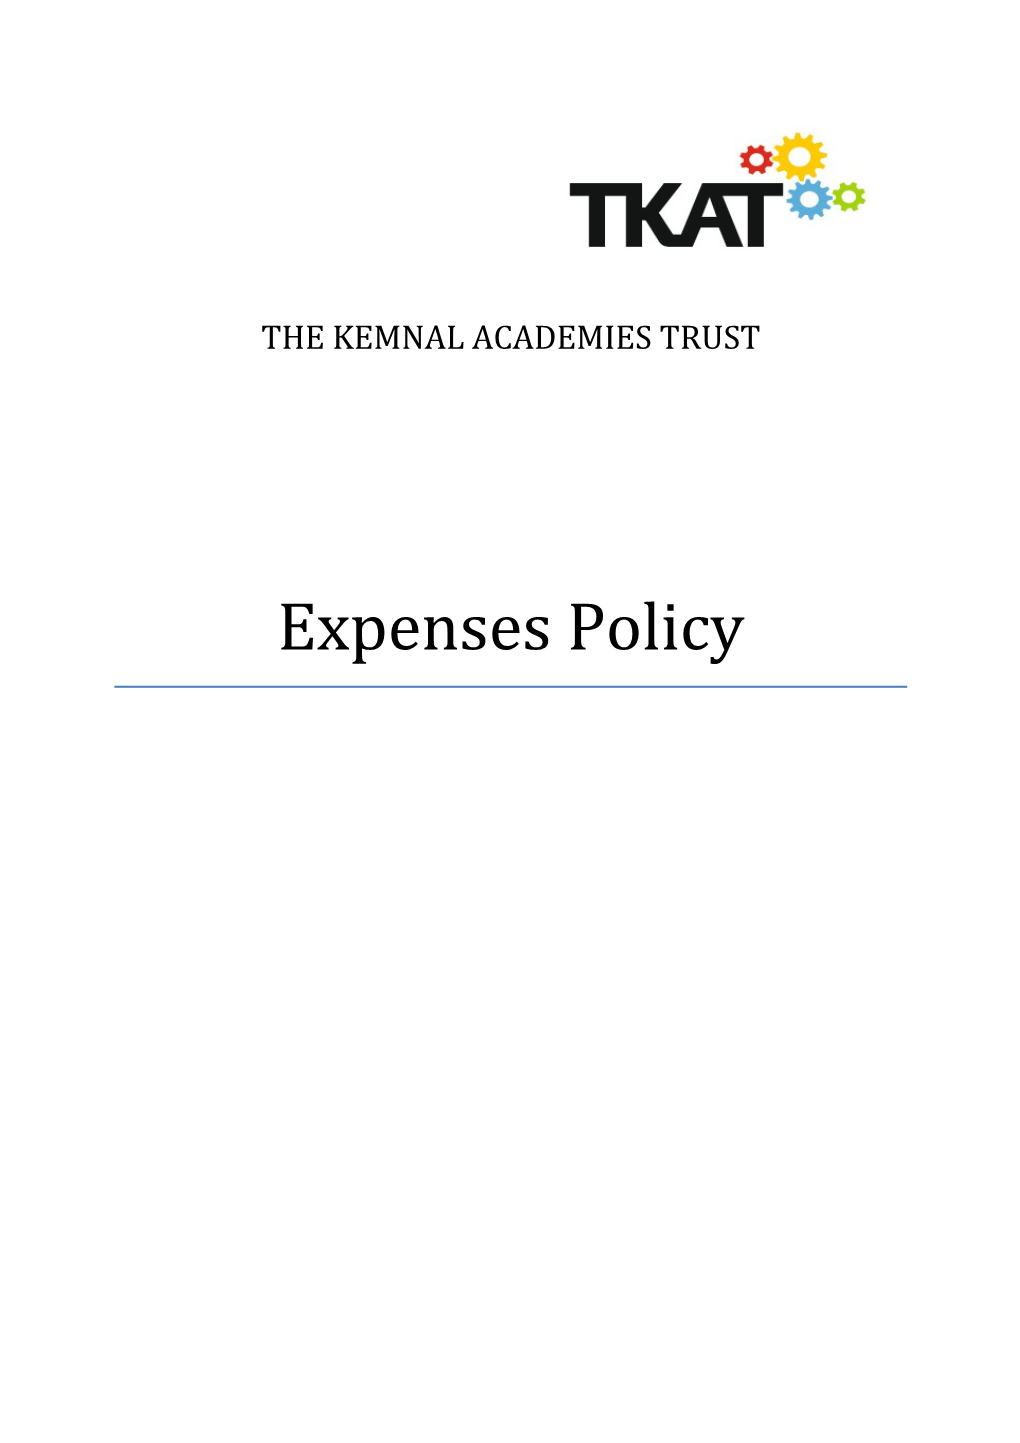 1.1This Policy Sets out the Kemnal Academies Trust's (TKAT) Rules on How Employees, LGB